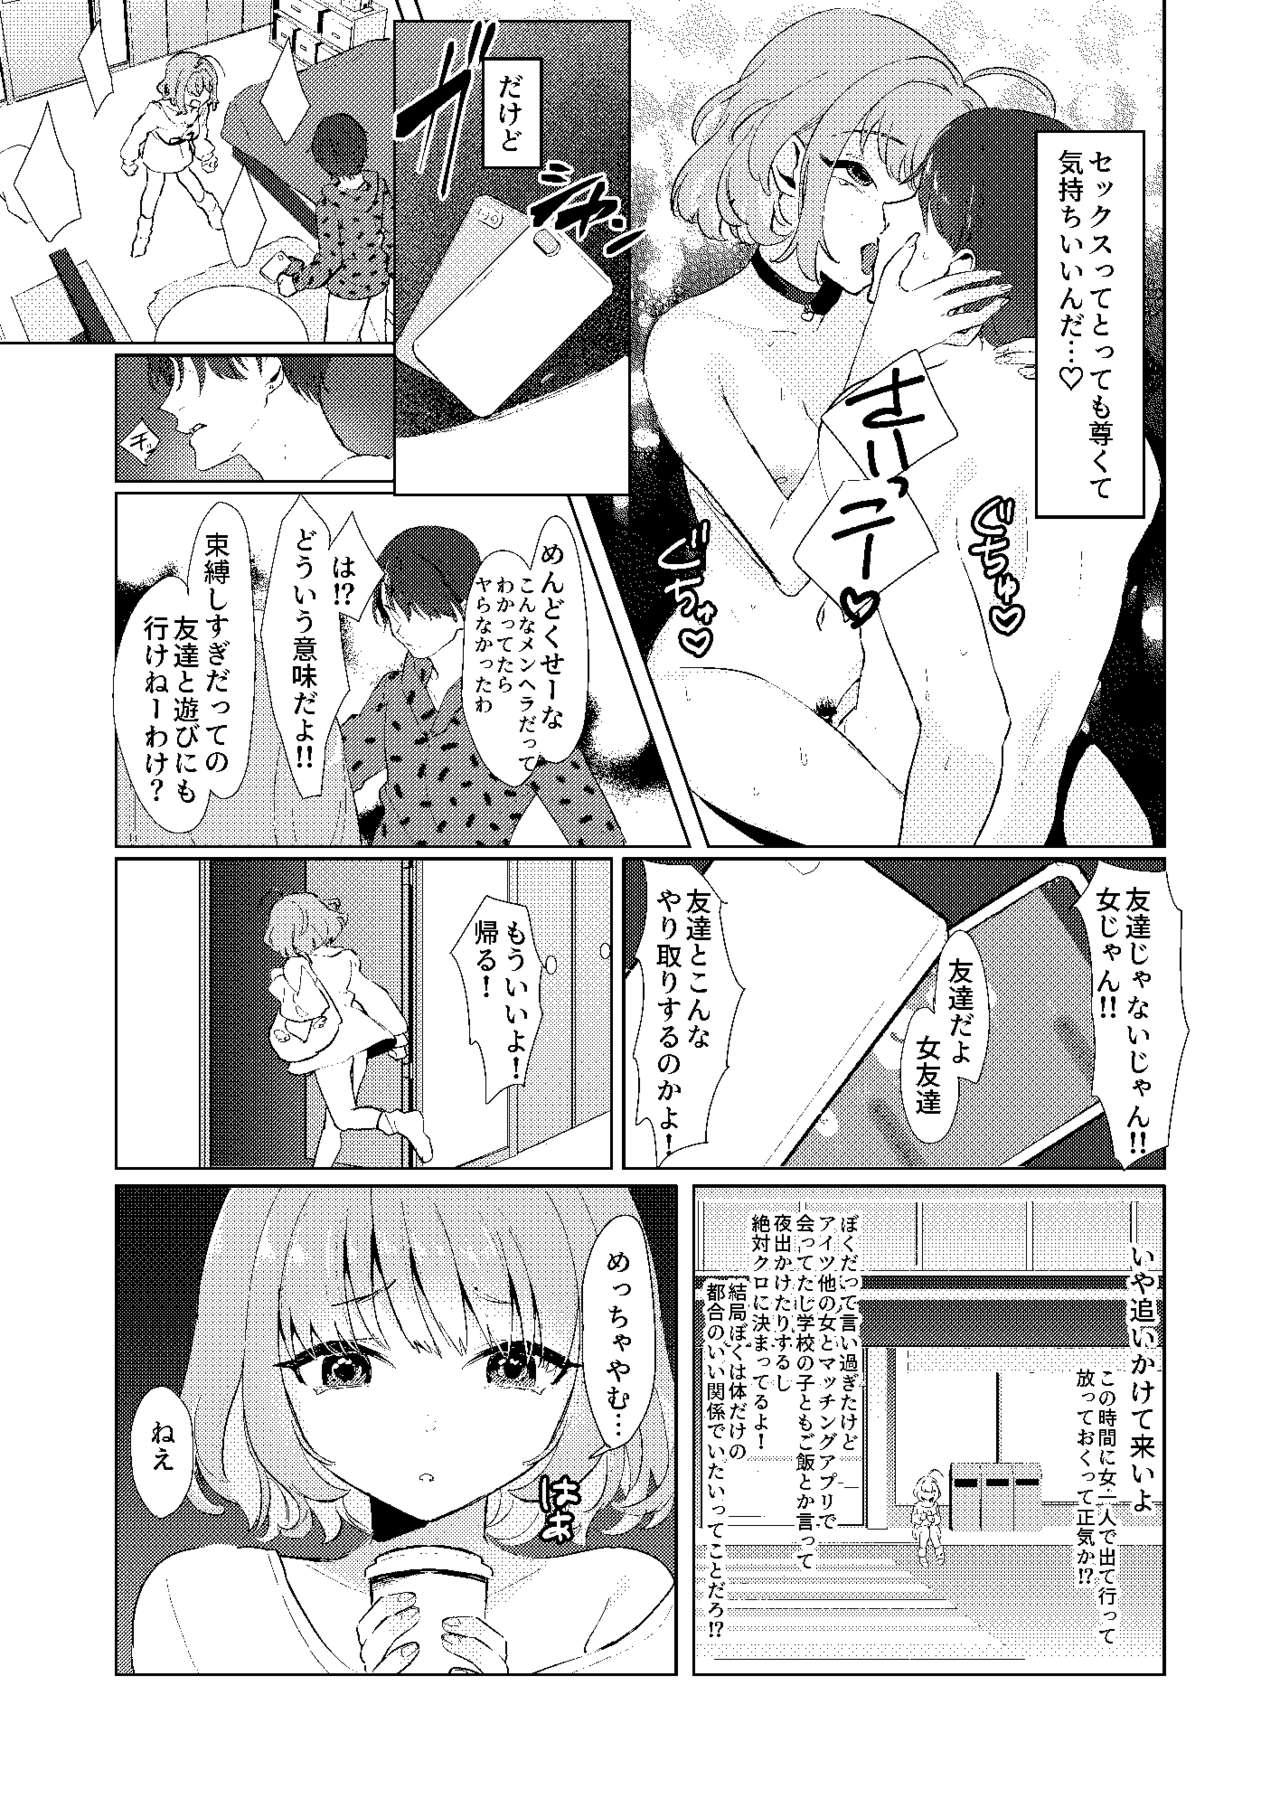 Storyline 夢〇りあむの青春 - The idolmaster Cock Suckers - Page 10